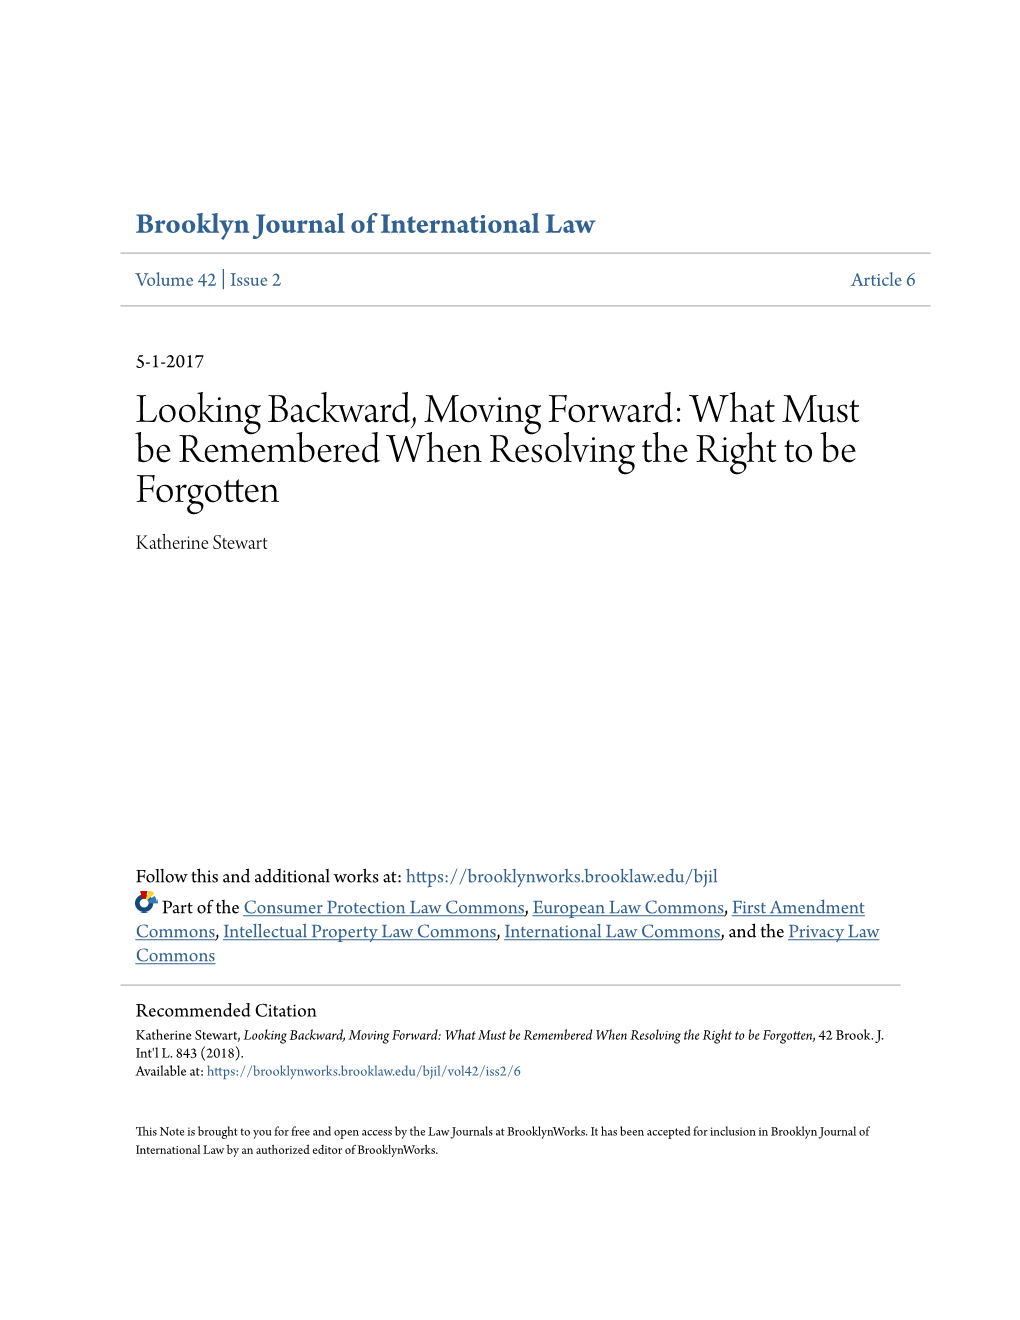 Looking Backward, Moving Forward: What Must Be Remembered When Resolving the Right to Be Forgotten Katherine Stewart